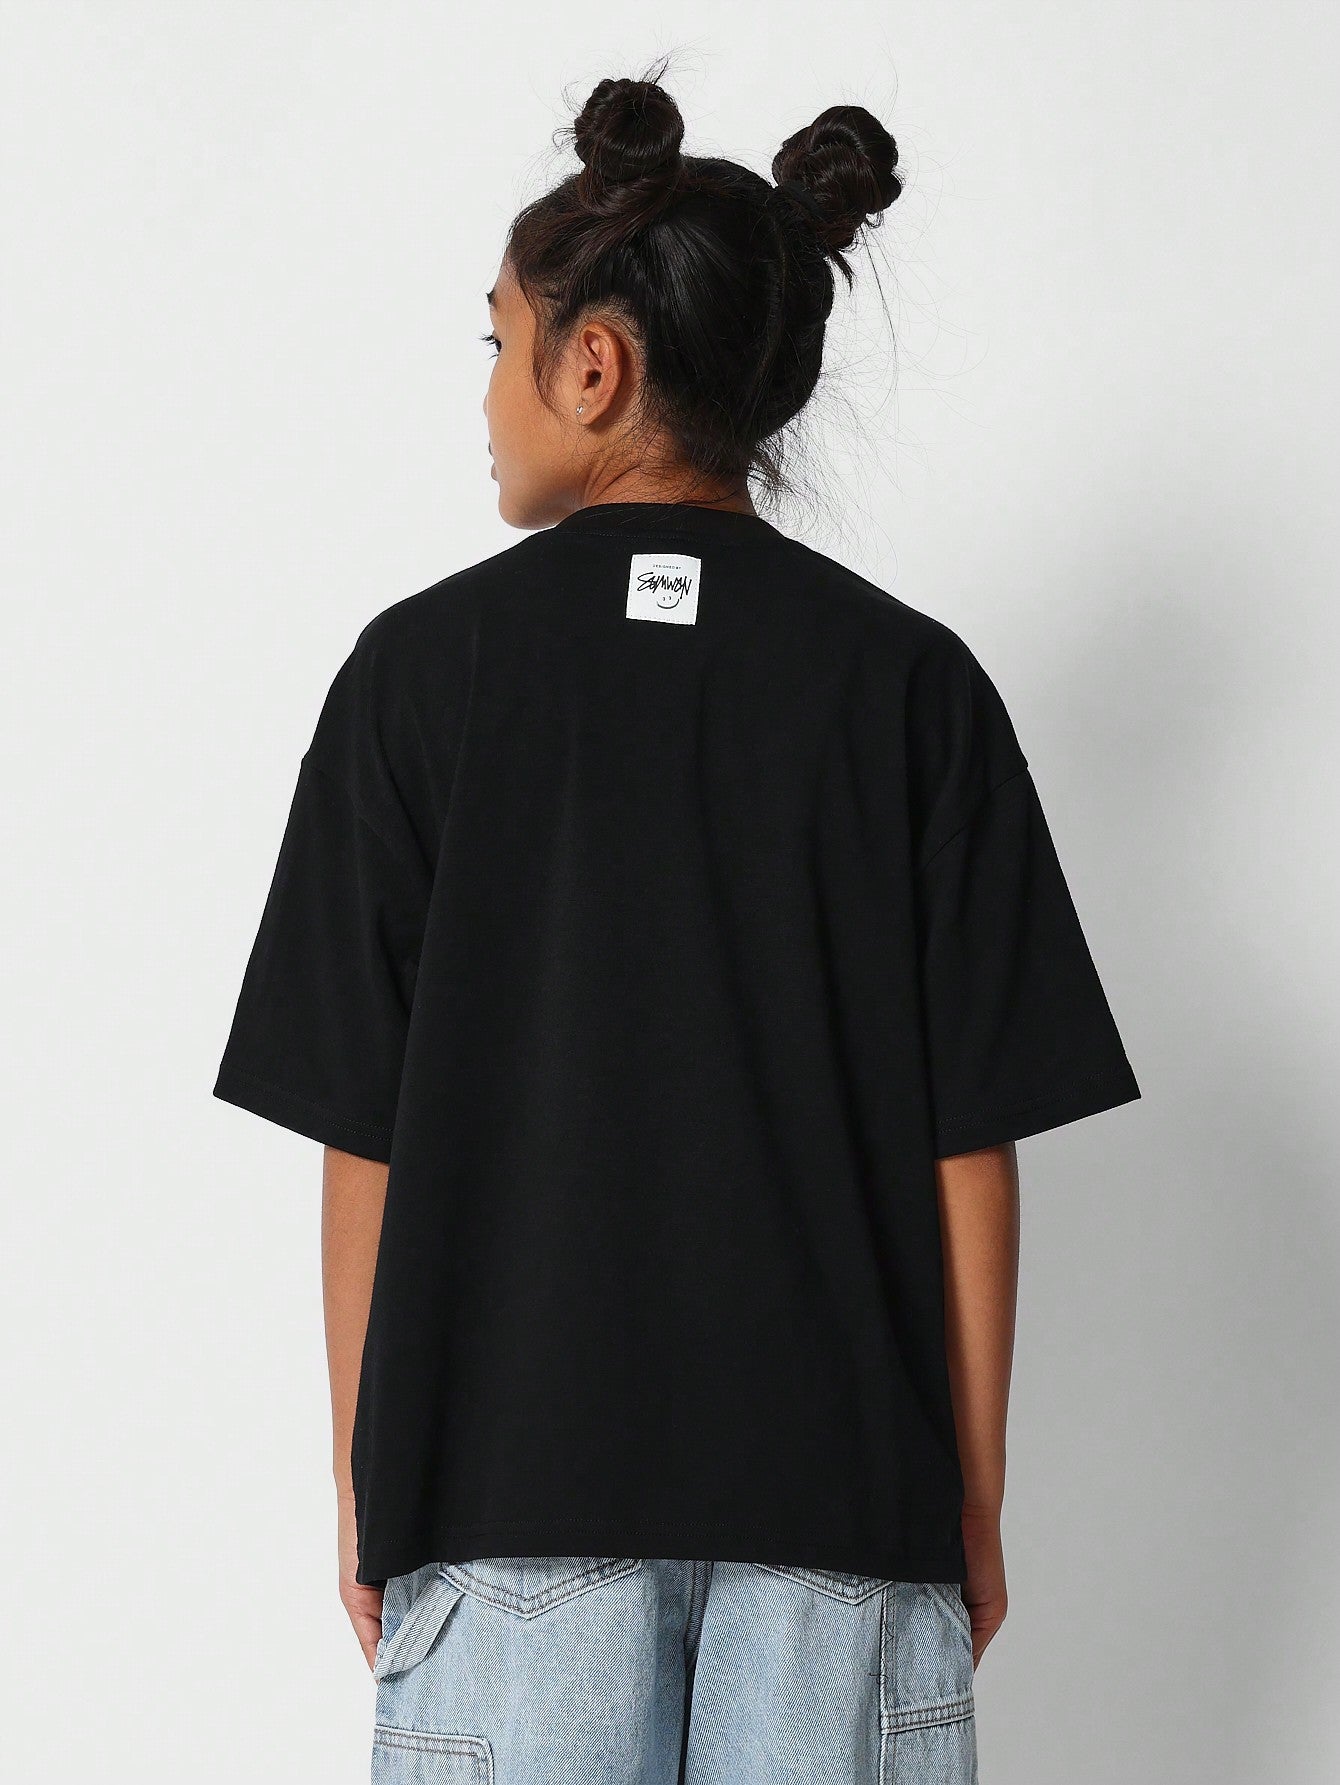 Kids Unisex Oversized Fit Tee With Front Print Back To School